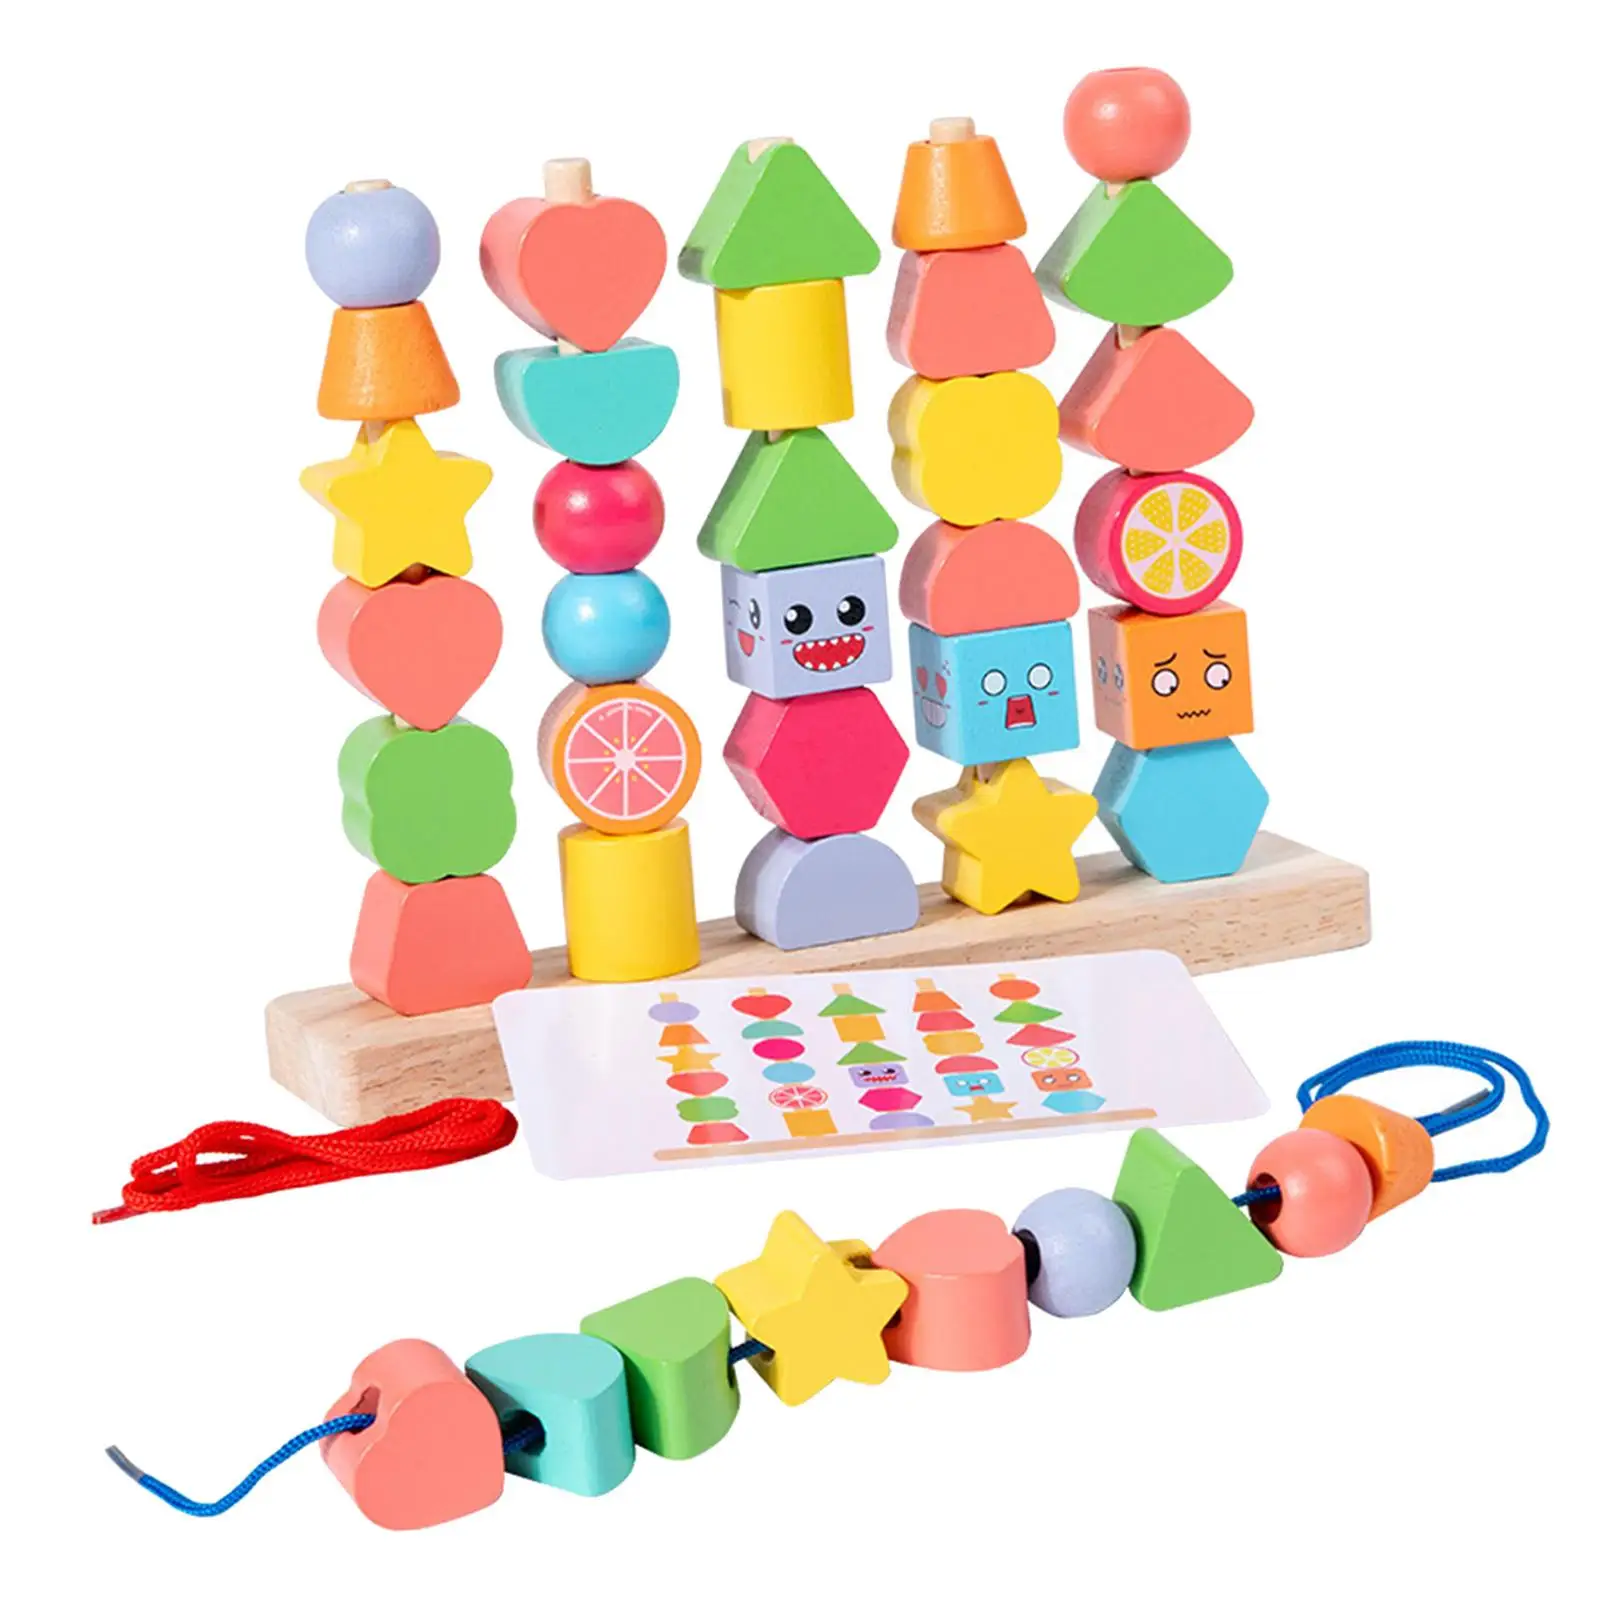 Matching Shapes Stacking Toy Stem Lacing Beads for Birthday Gift Kids